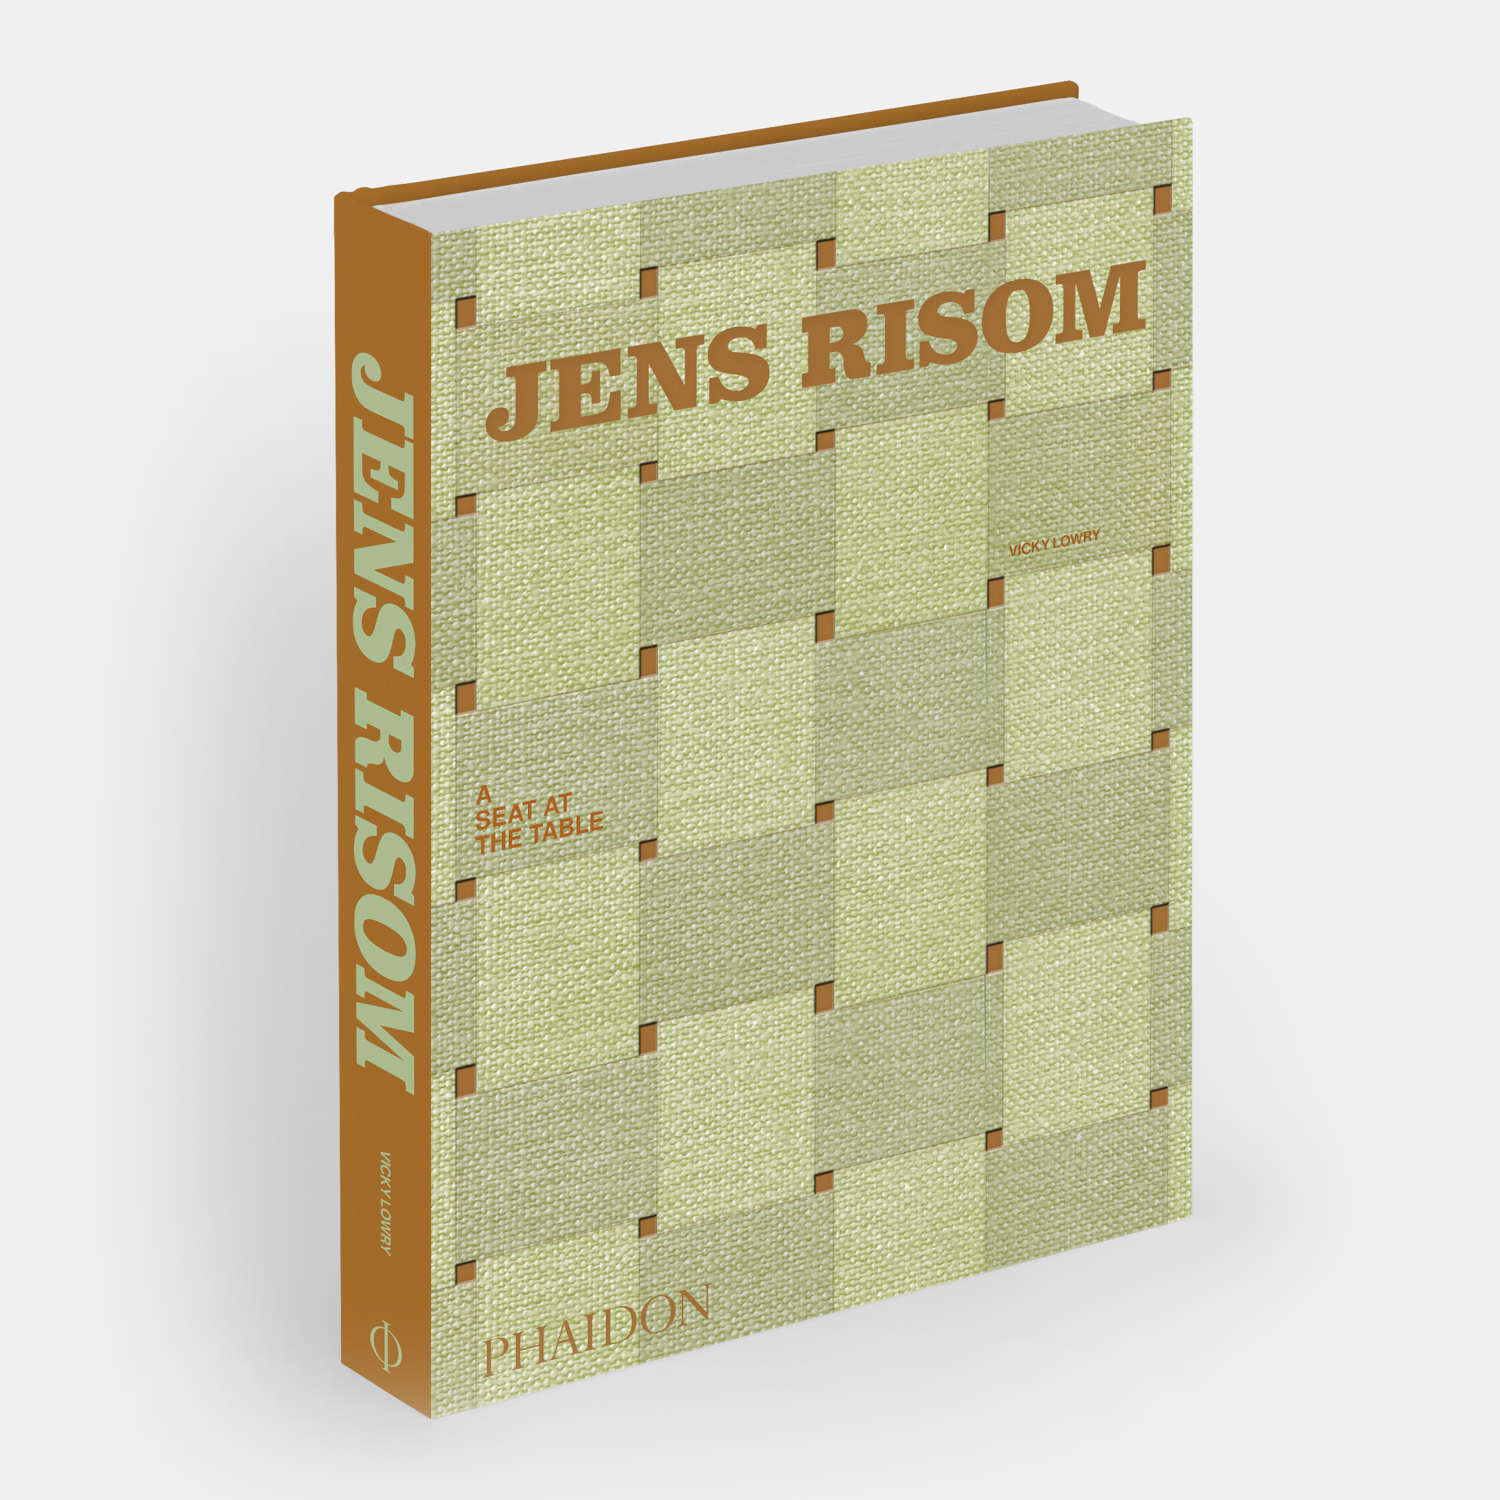 All you need to know about Jens Risom: A Seat at the Table